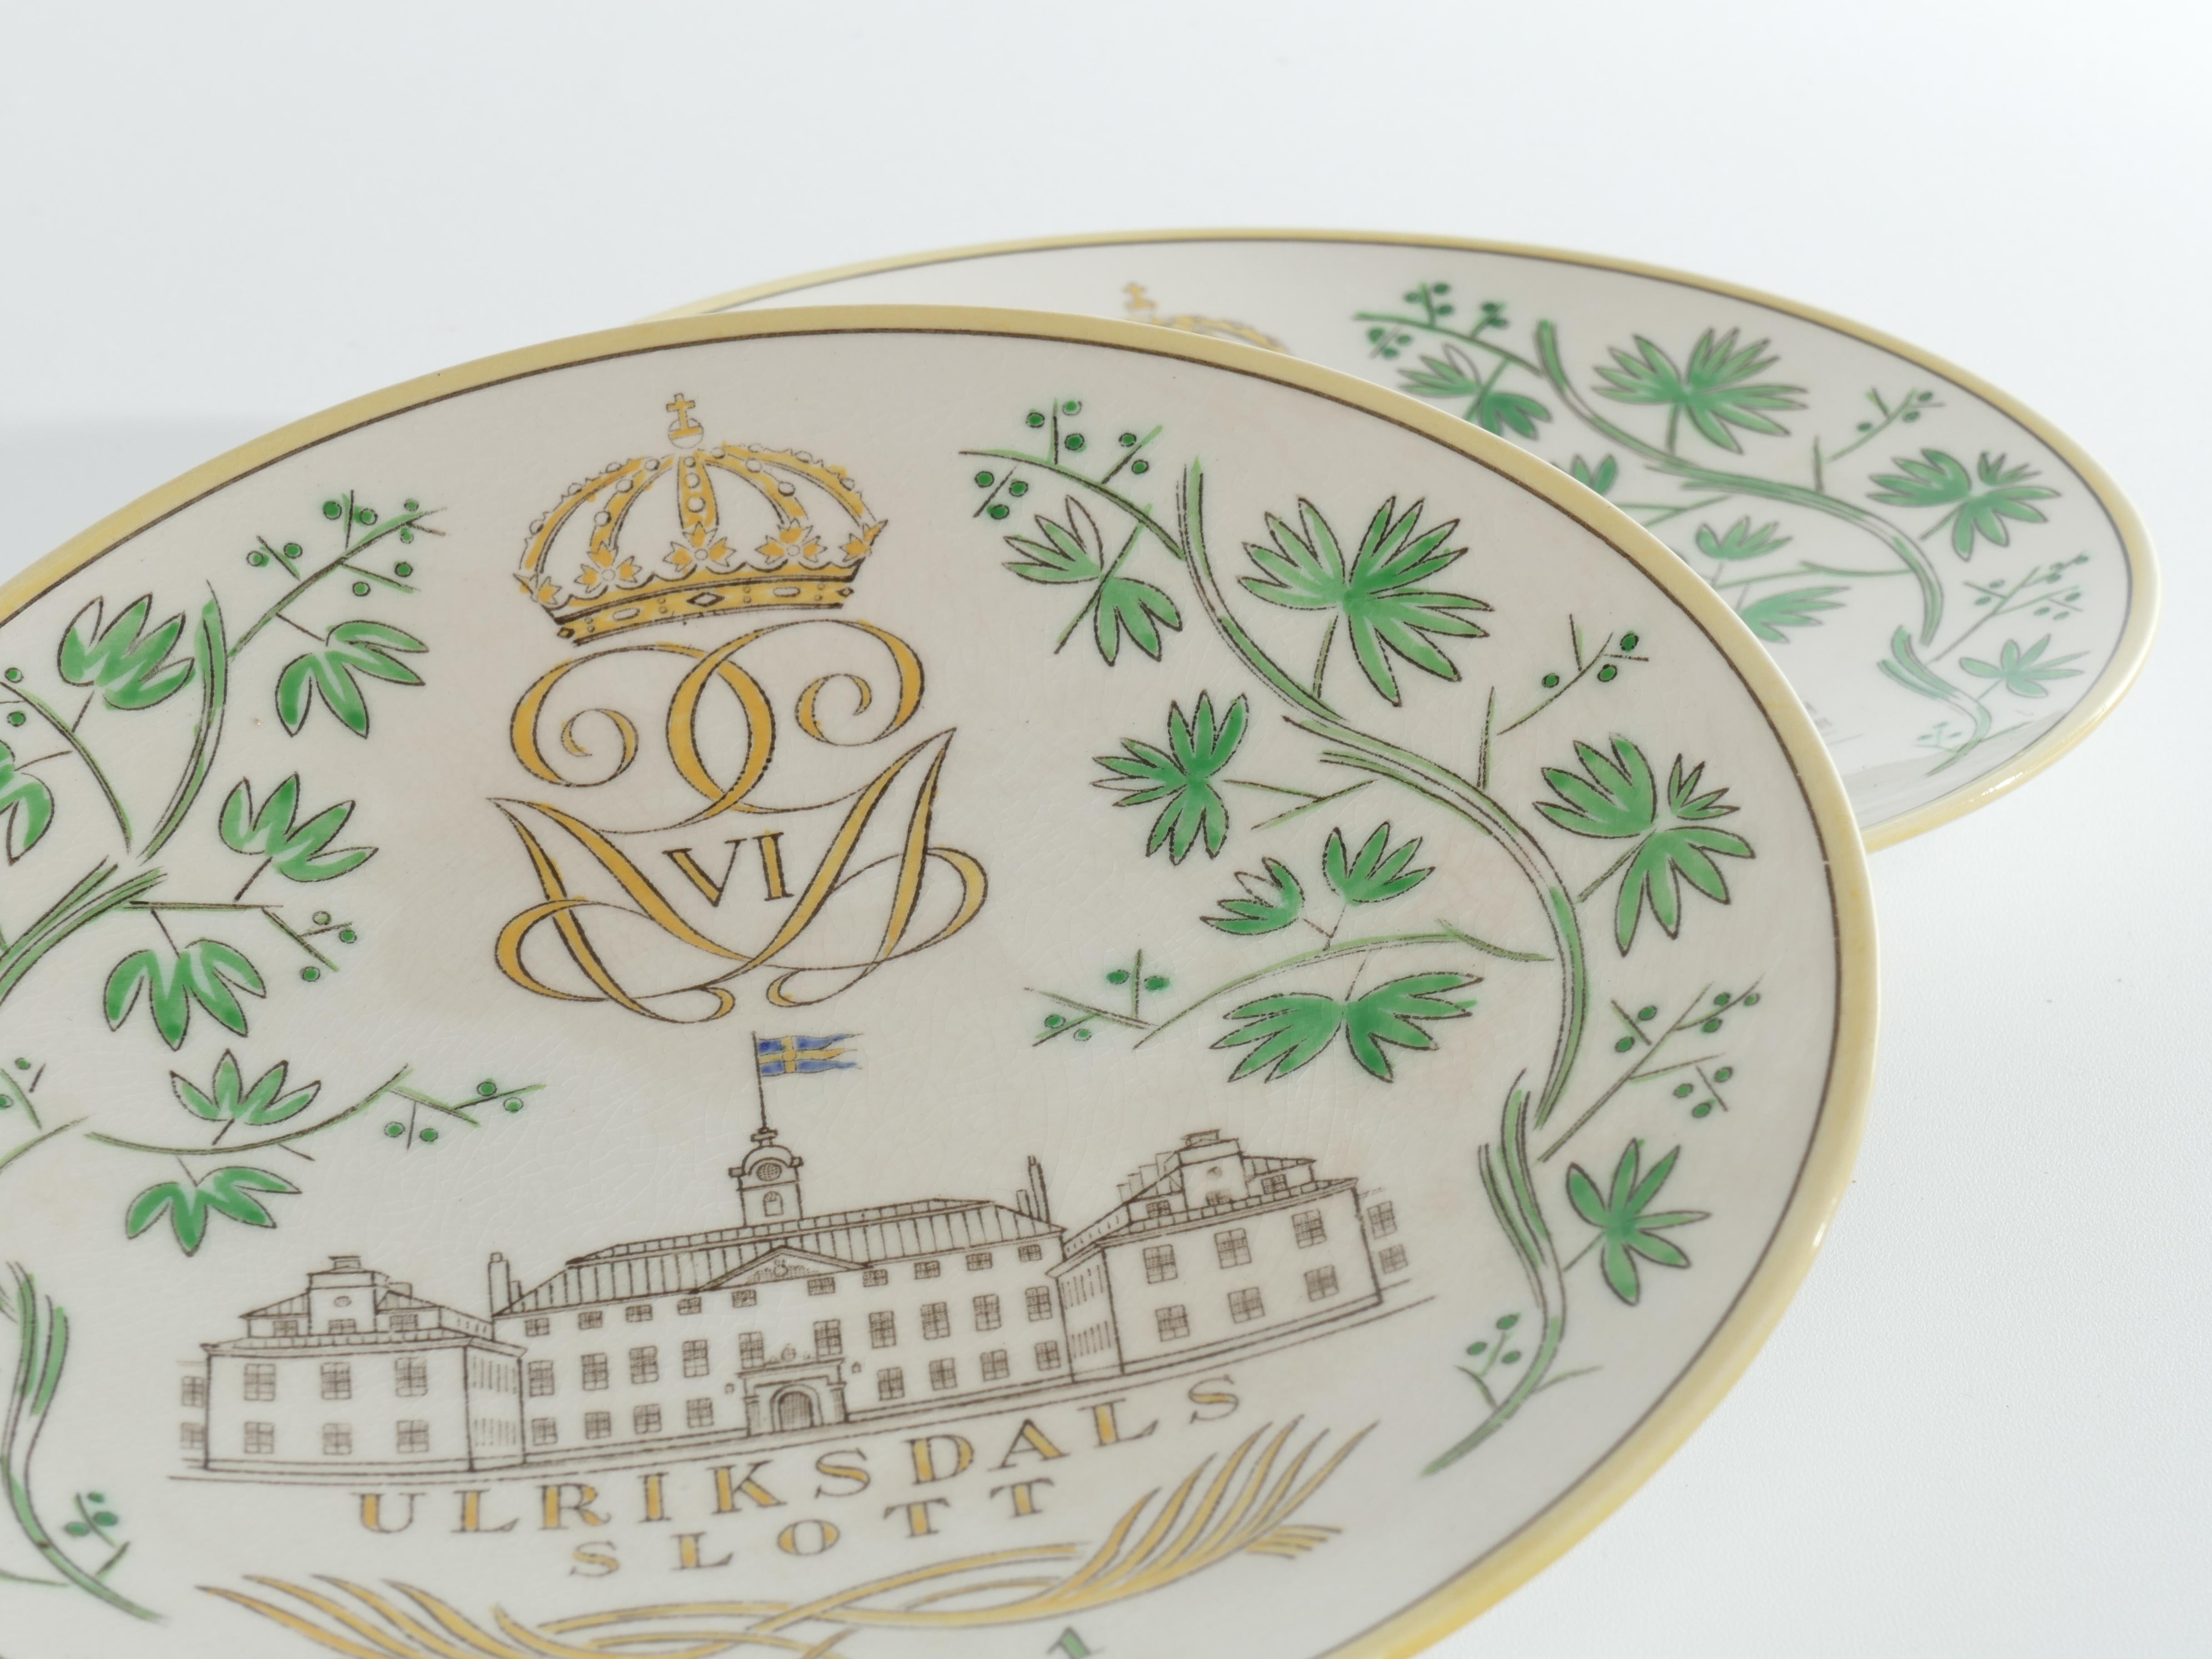 Swedish Grace Plates with Ulriksdal Palace in Yellow and Green by Gefle 1951 For Sale 2